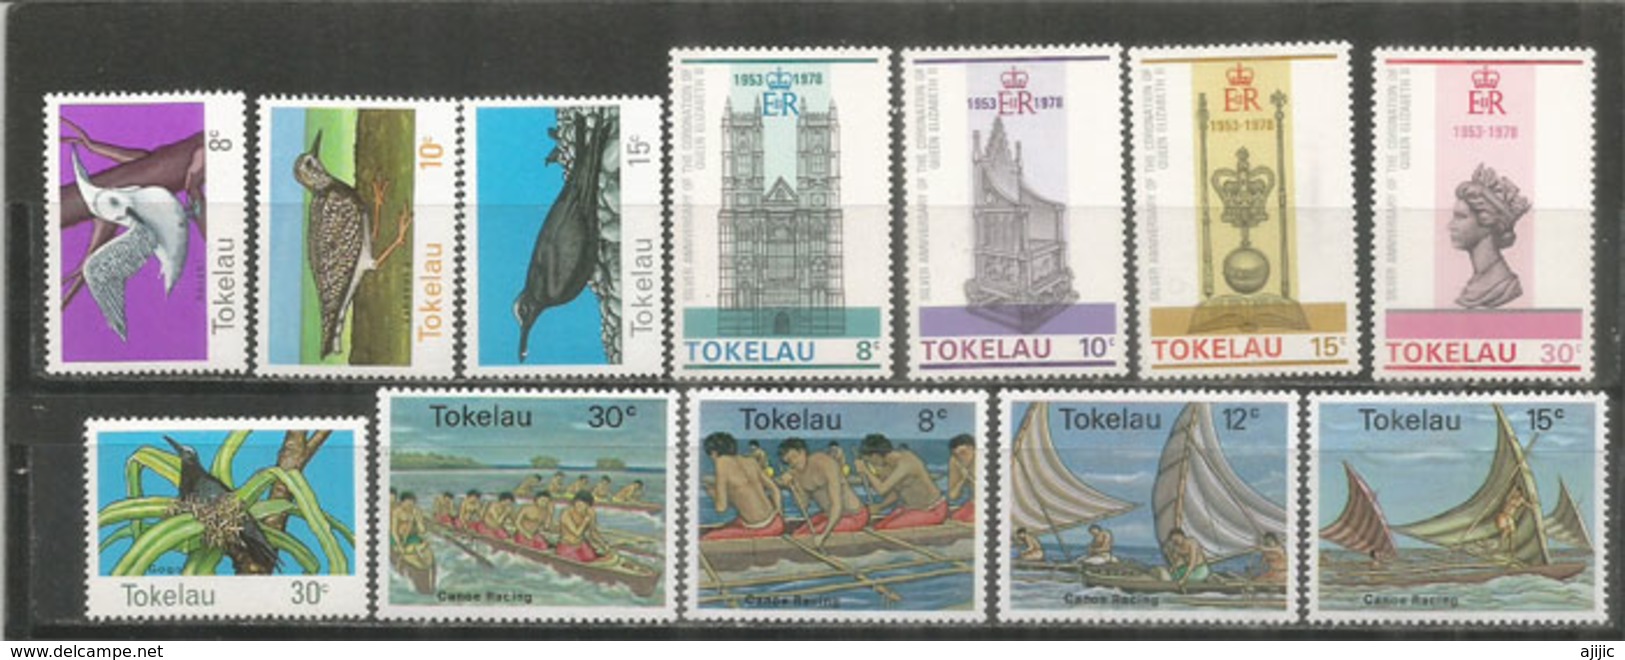 Annees Completes 1977 & 1978. 12 Timbres Neufs **  Cote 20,00 Euro - Tokelau